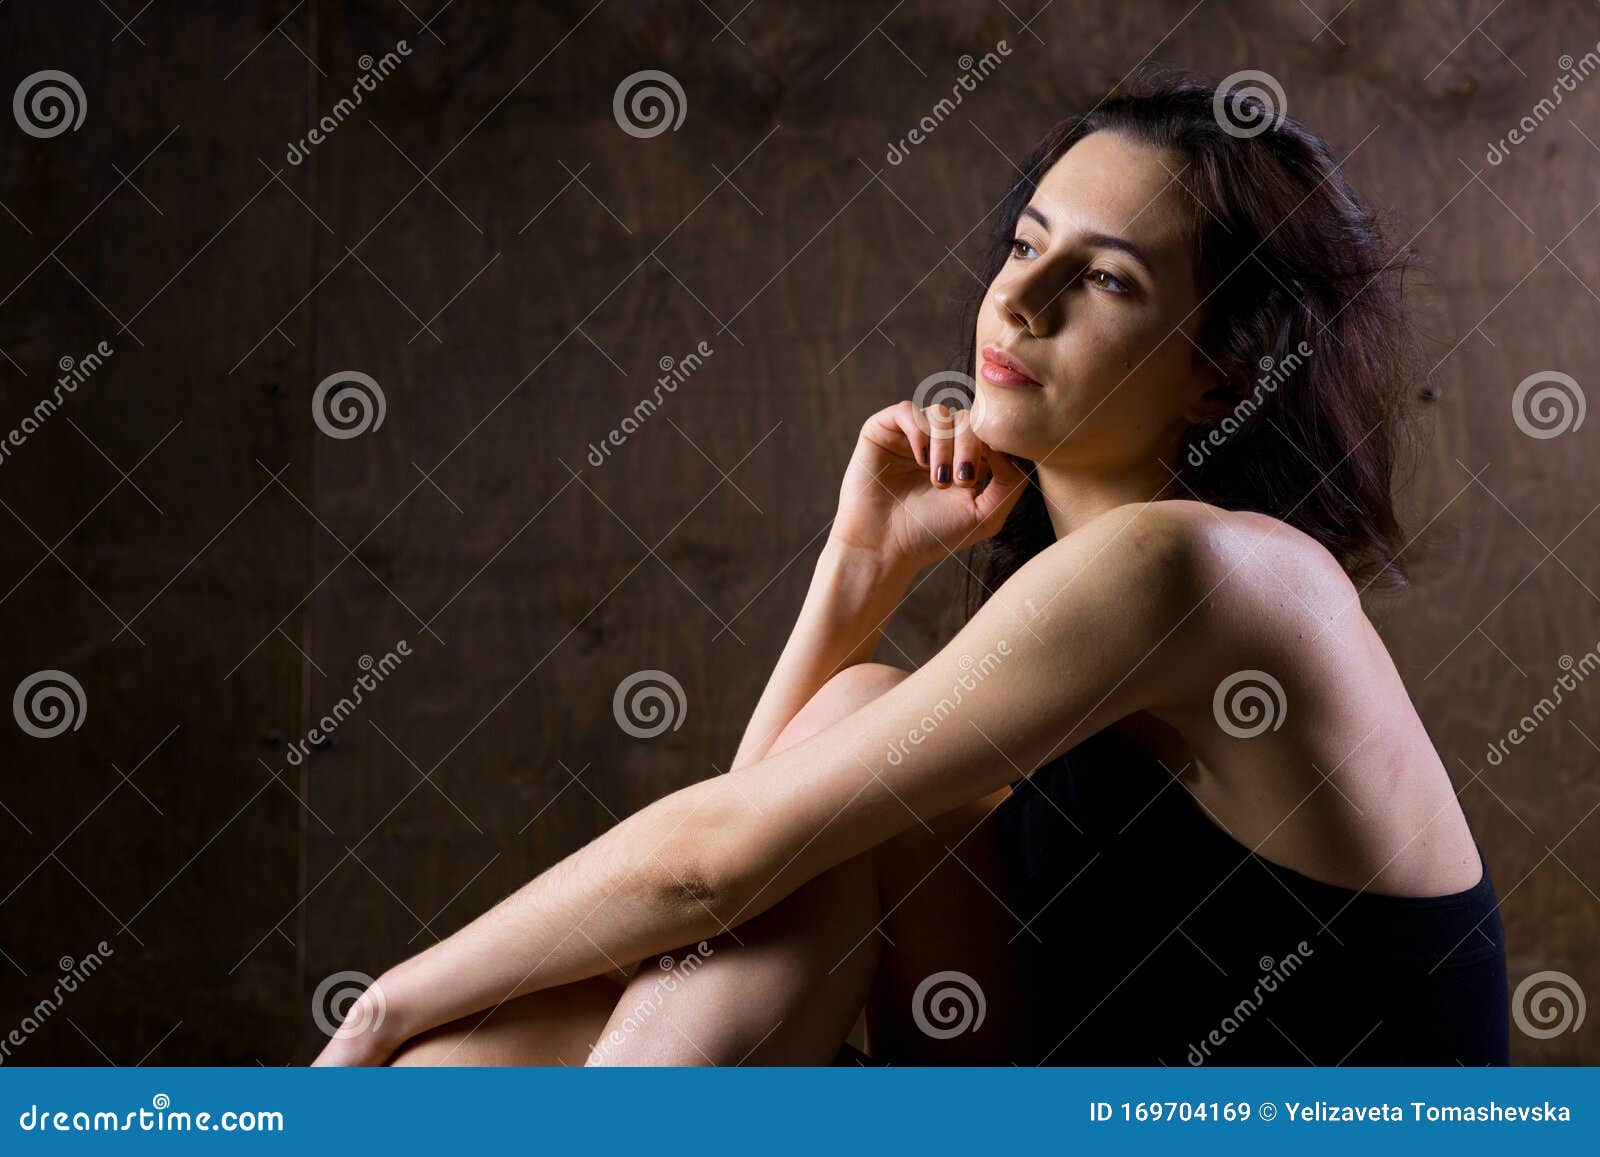 Abstract And Stress Emotional Concept. Depressed Girl In ...